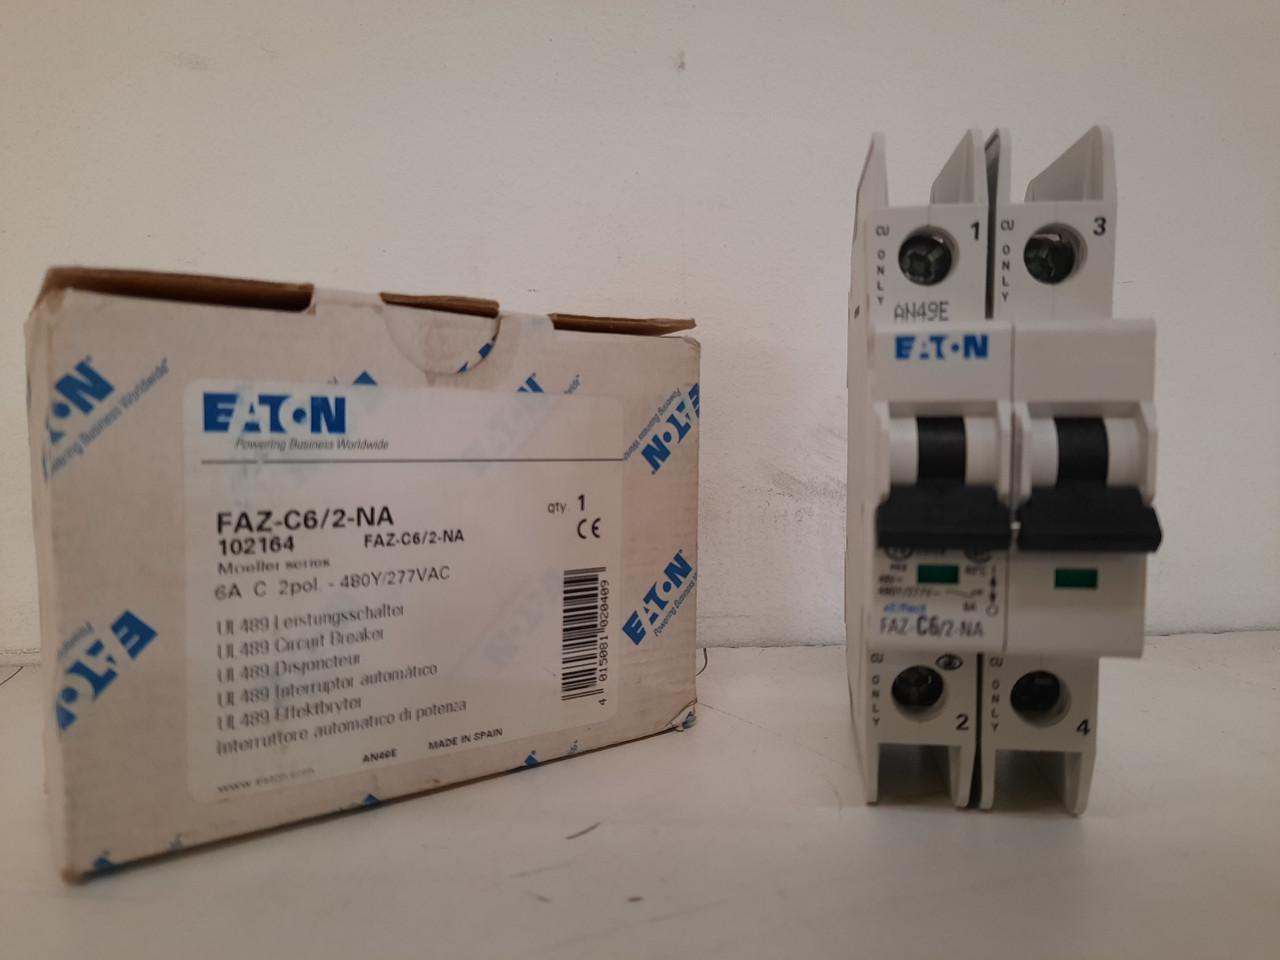 Eaton FAZ-C6/2-NA 277/480 VAC 50/60 Hz, 6 A, 2-Pole, 10/14 kA, 5 to 10 x Rated Current, Screw Terminal, DIN Rail Mount, Standard Packaging, C-Curve, Current Limiting, Thermal Magnetic